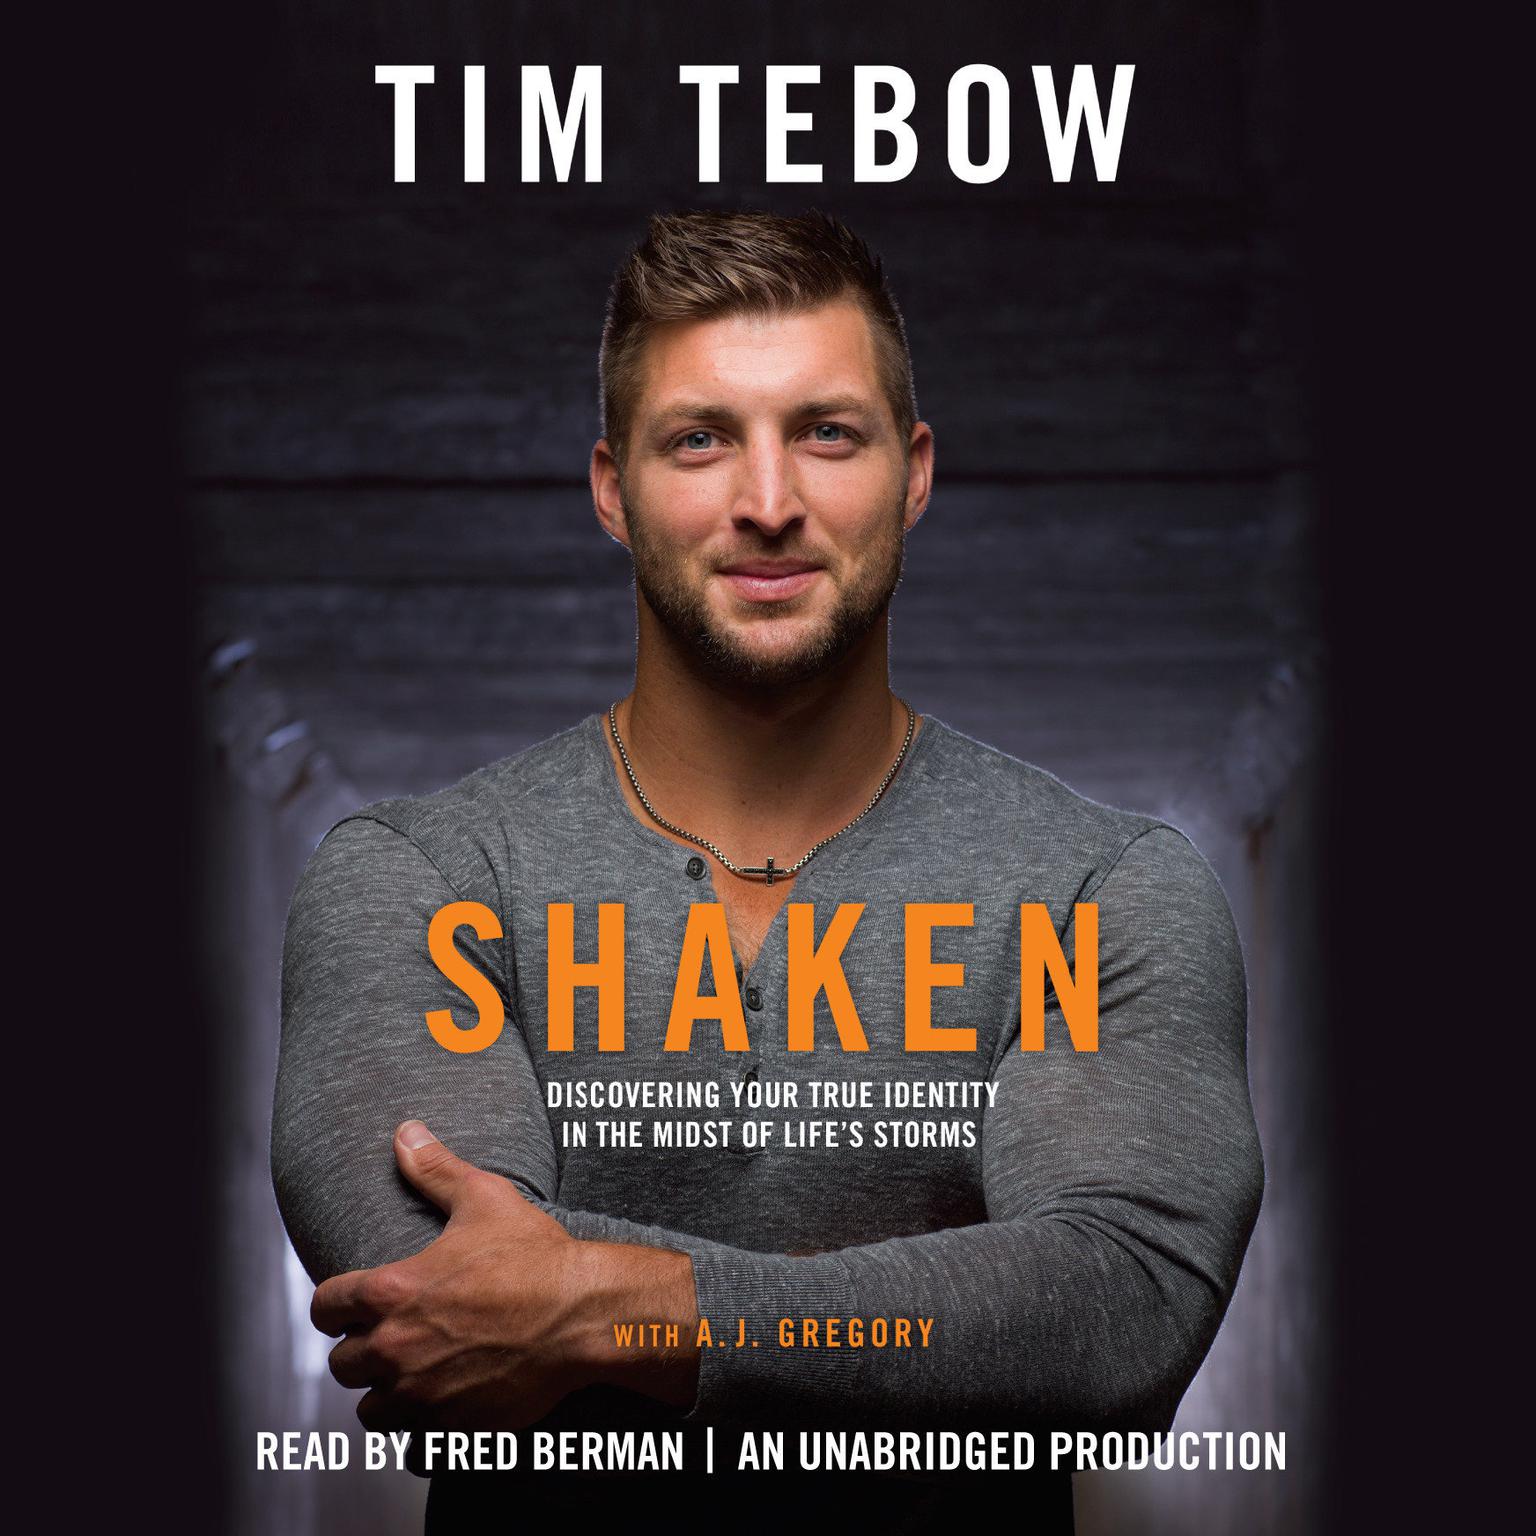 Shaken: Discoving Your True Identity in the Midst of Lifes Storms Audiobook, by Tim Tebow